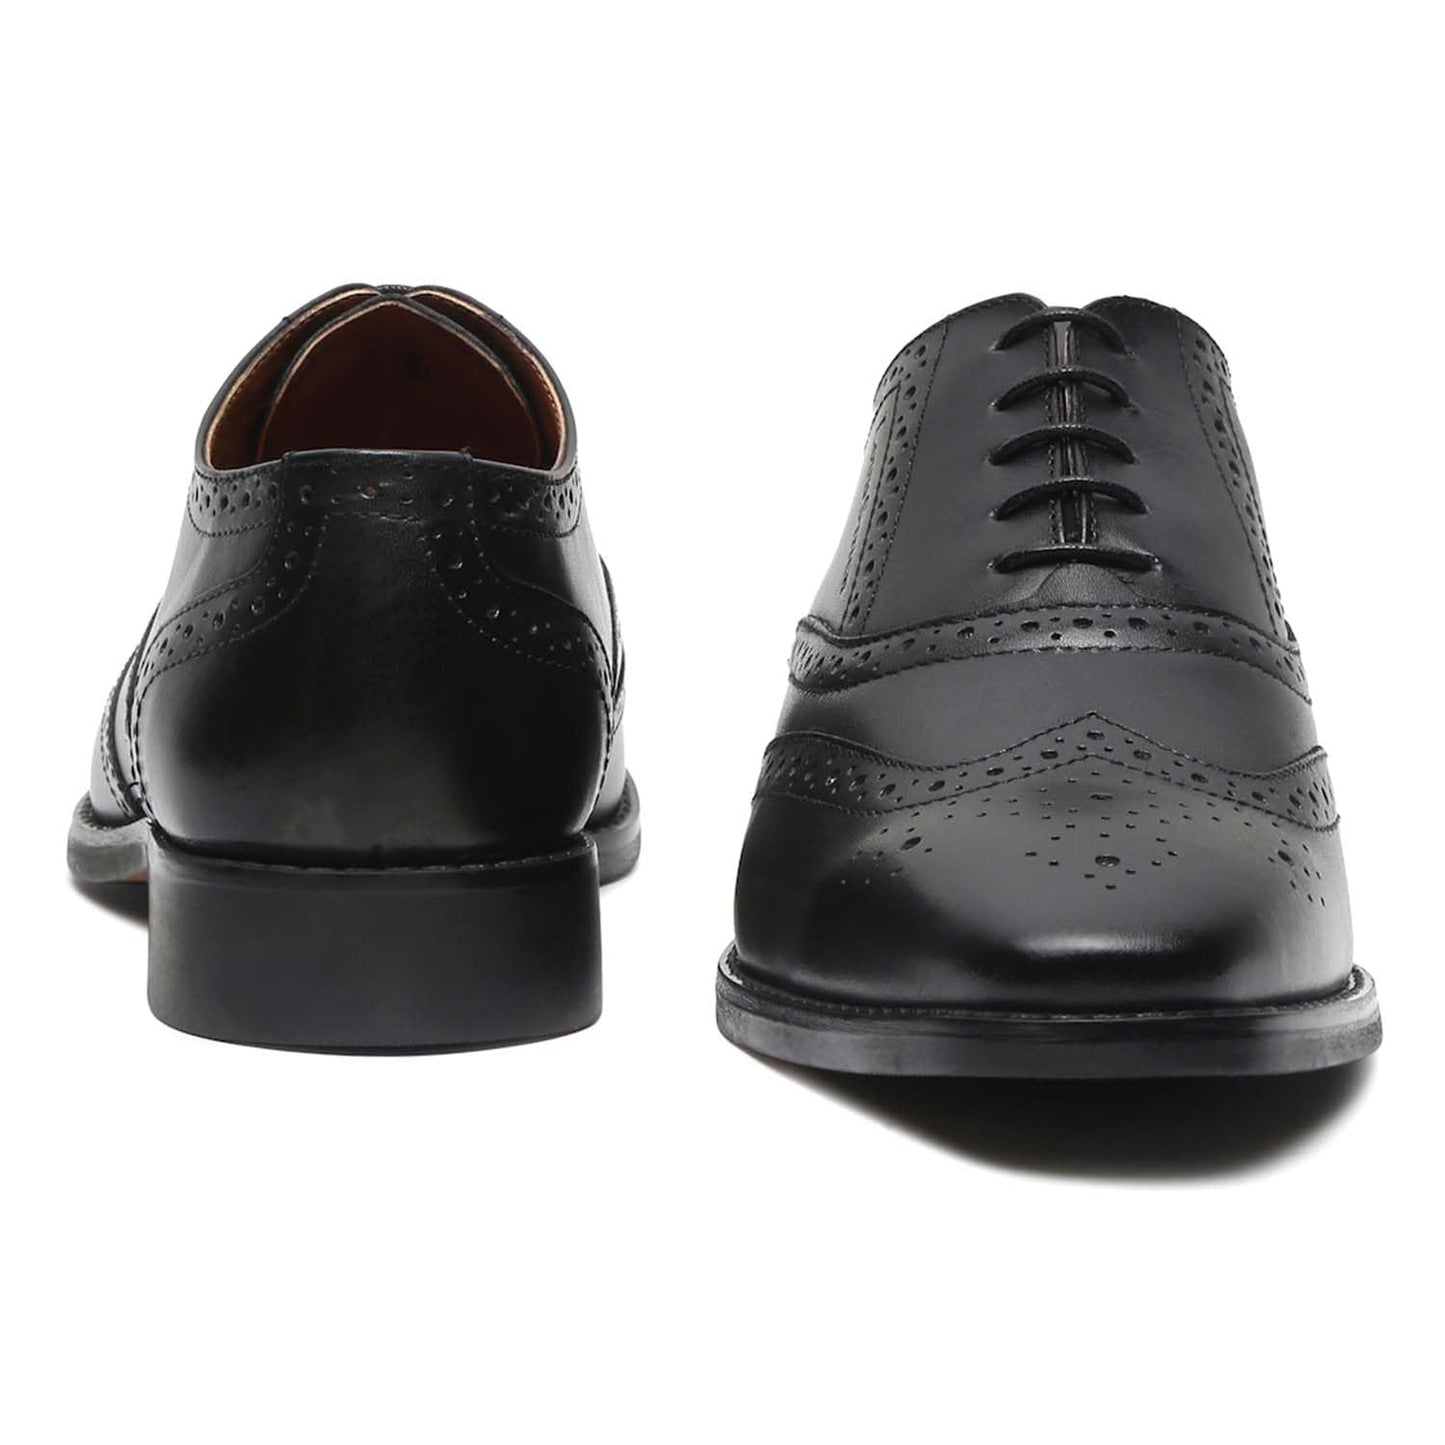 LOUIS STITCH Mens Obsidian Black Italian Leather Wingtip Brogue Handmade Formal Lace Up Shoe for Men (RXBGJB-) - 11 UK